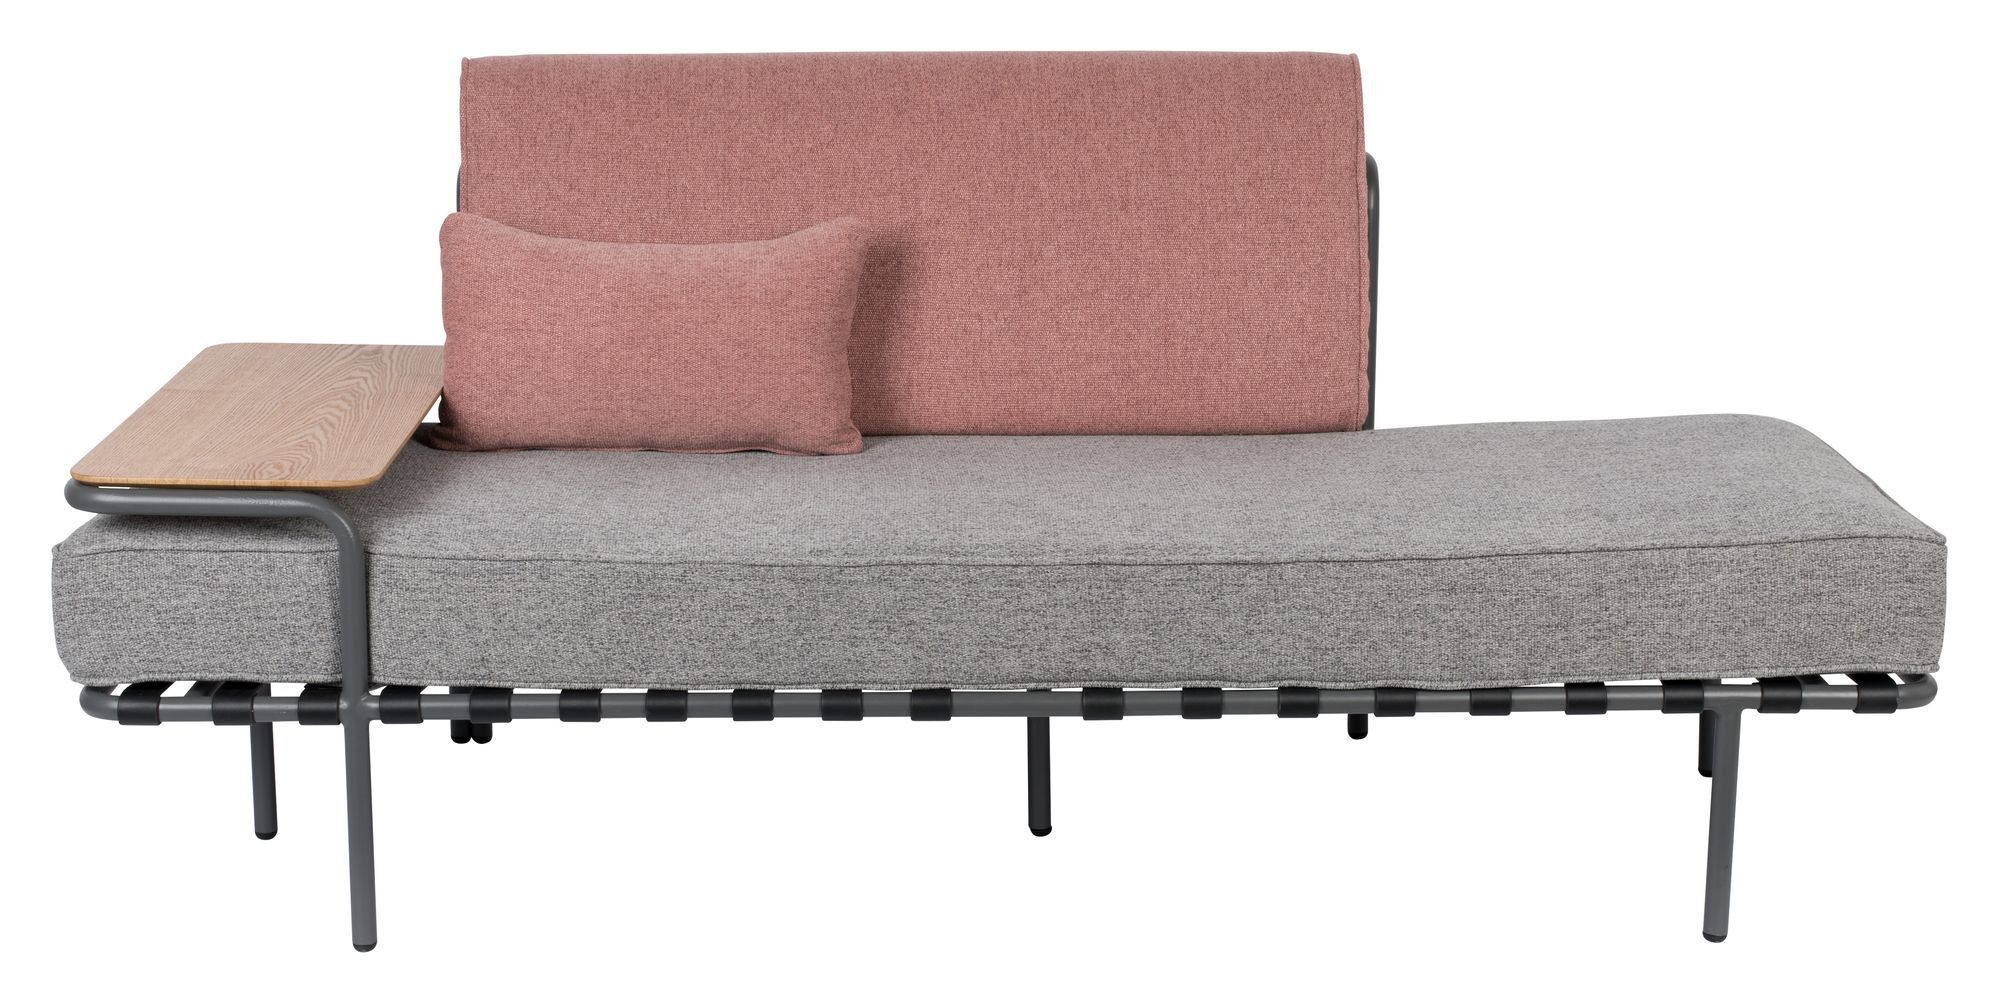 Zuiver Star Daybed - Pink/Grå   Unoliving